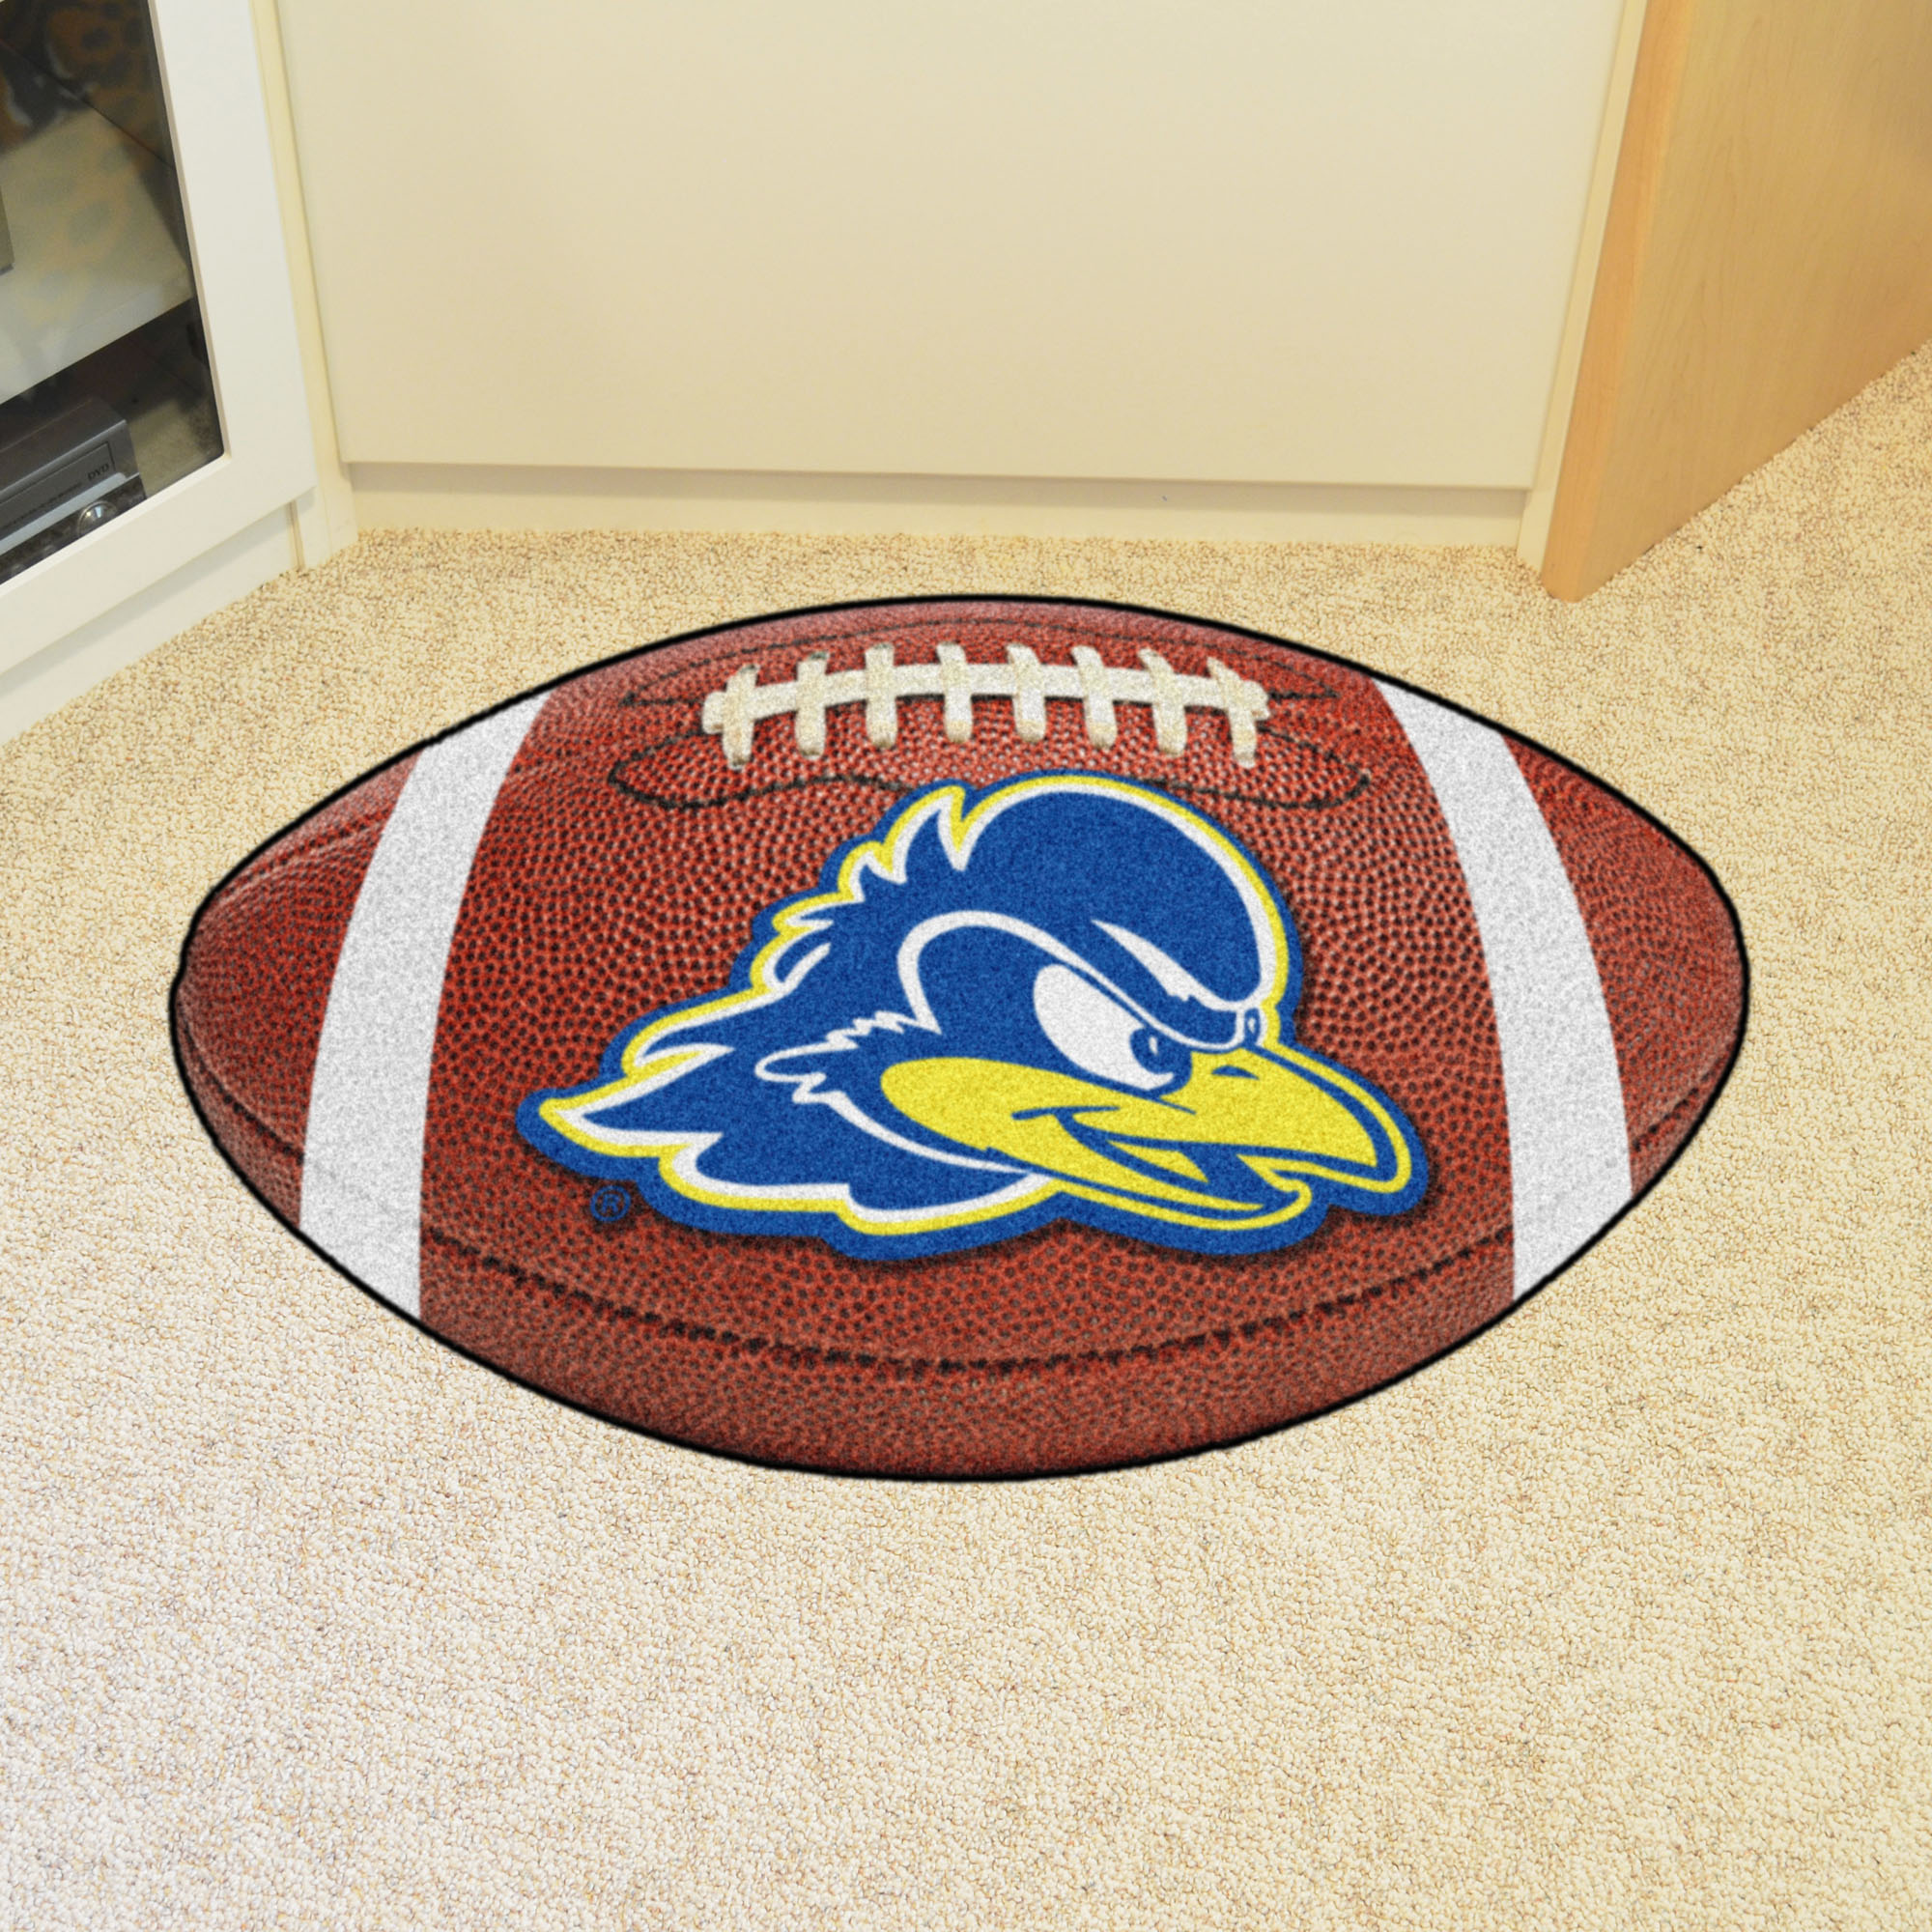 University of Delaware Ball Shaped Area Rugs (Ball Shaped Area Rugs: Football)